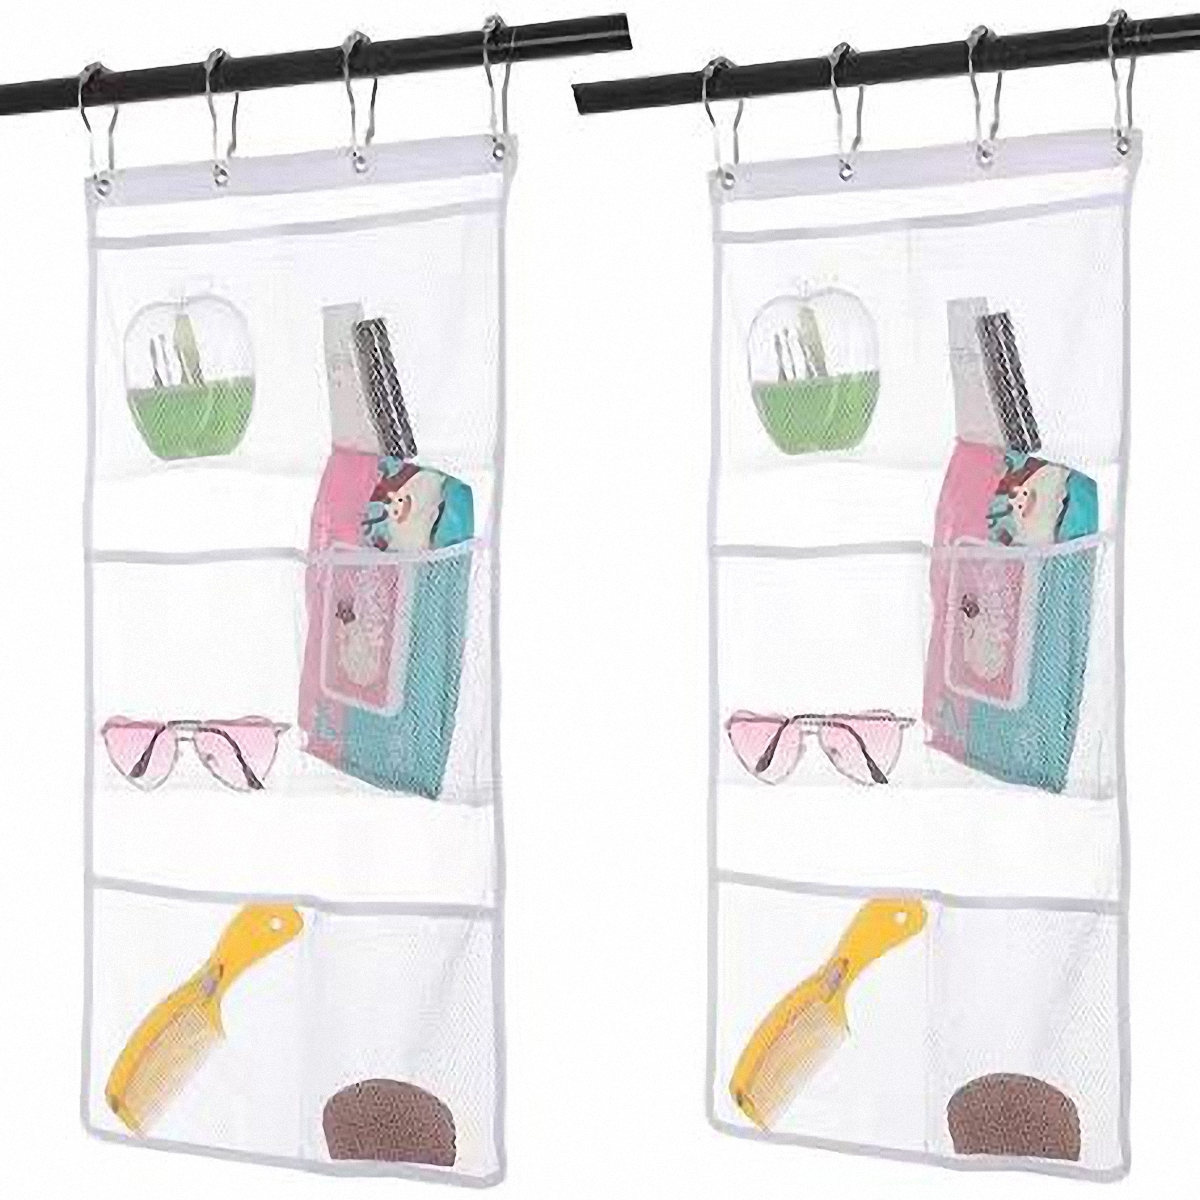 Mesh Hanging Bathroom and Shower Organizer – All About Tidy